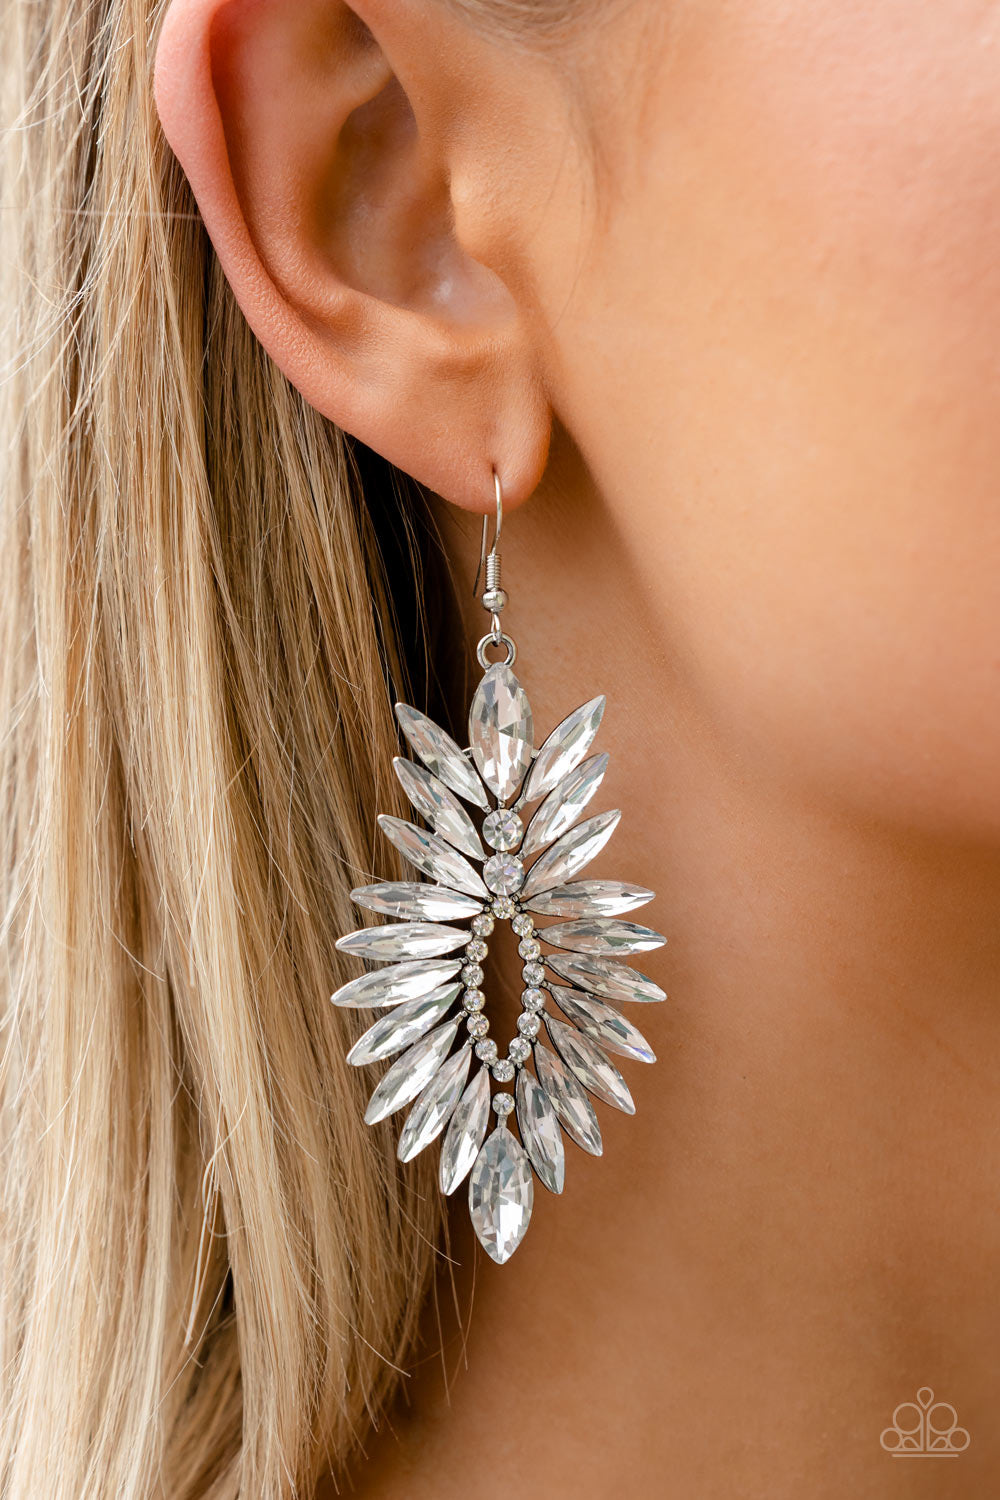 Paparazzi Turn up the Luxe - White Earrings - Bling Jewelry Paparazzi jewelry images